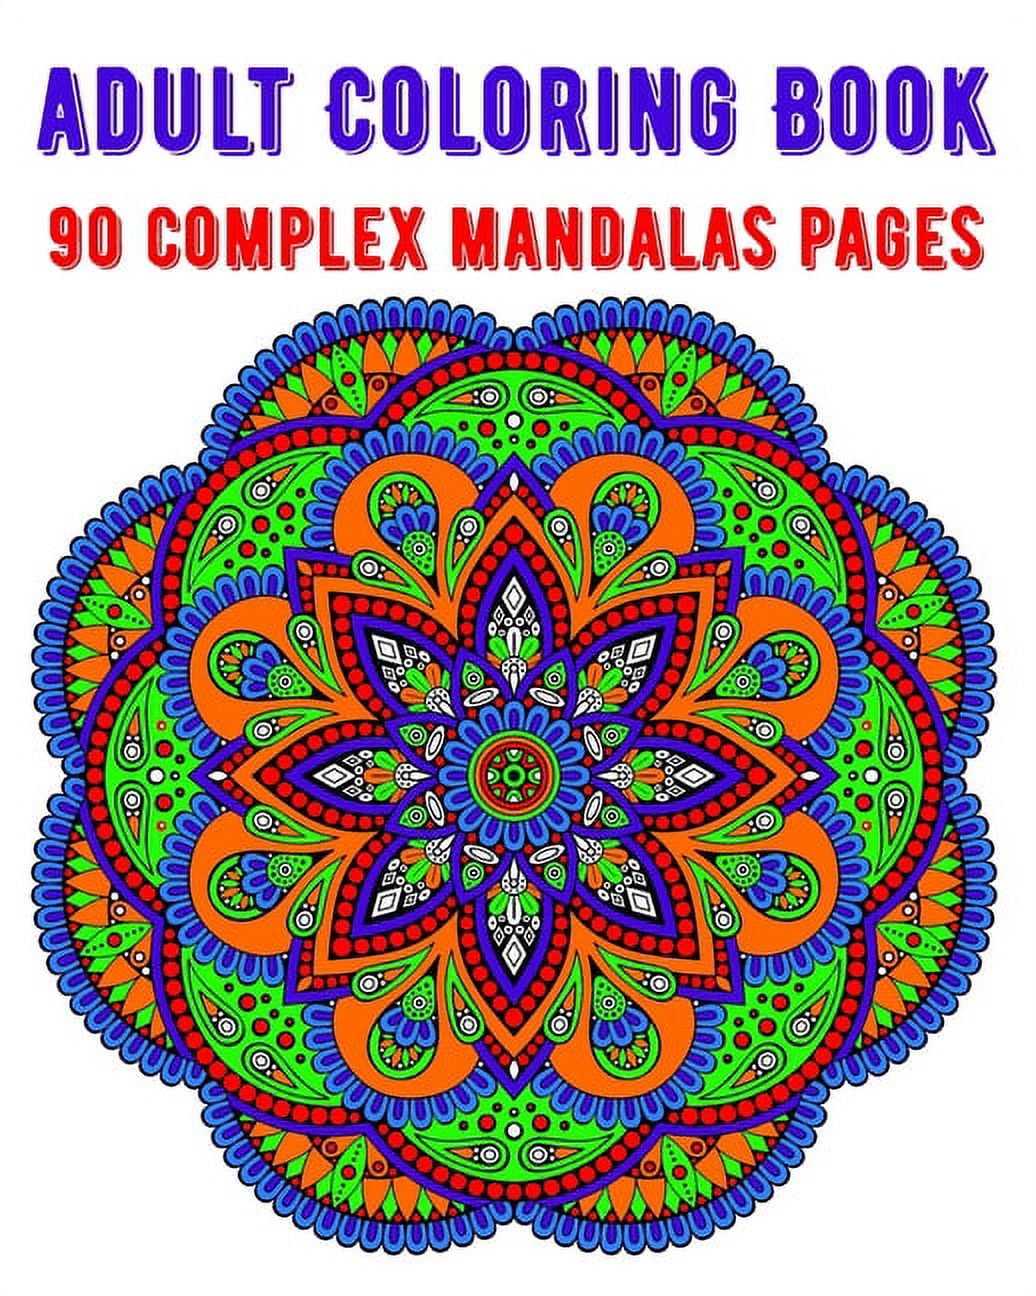 Adult coloring book plex mandalas pages mandala coloring book for all mindful patterns and mandalas coloring book stress relieving and relaxing coloring pages paperback